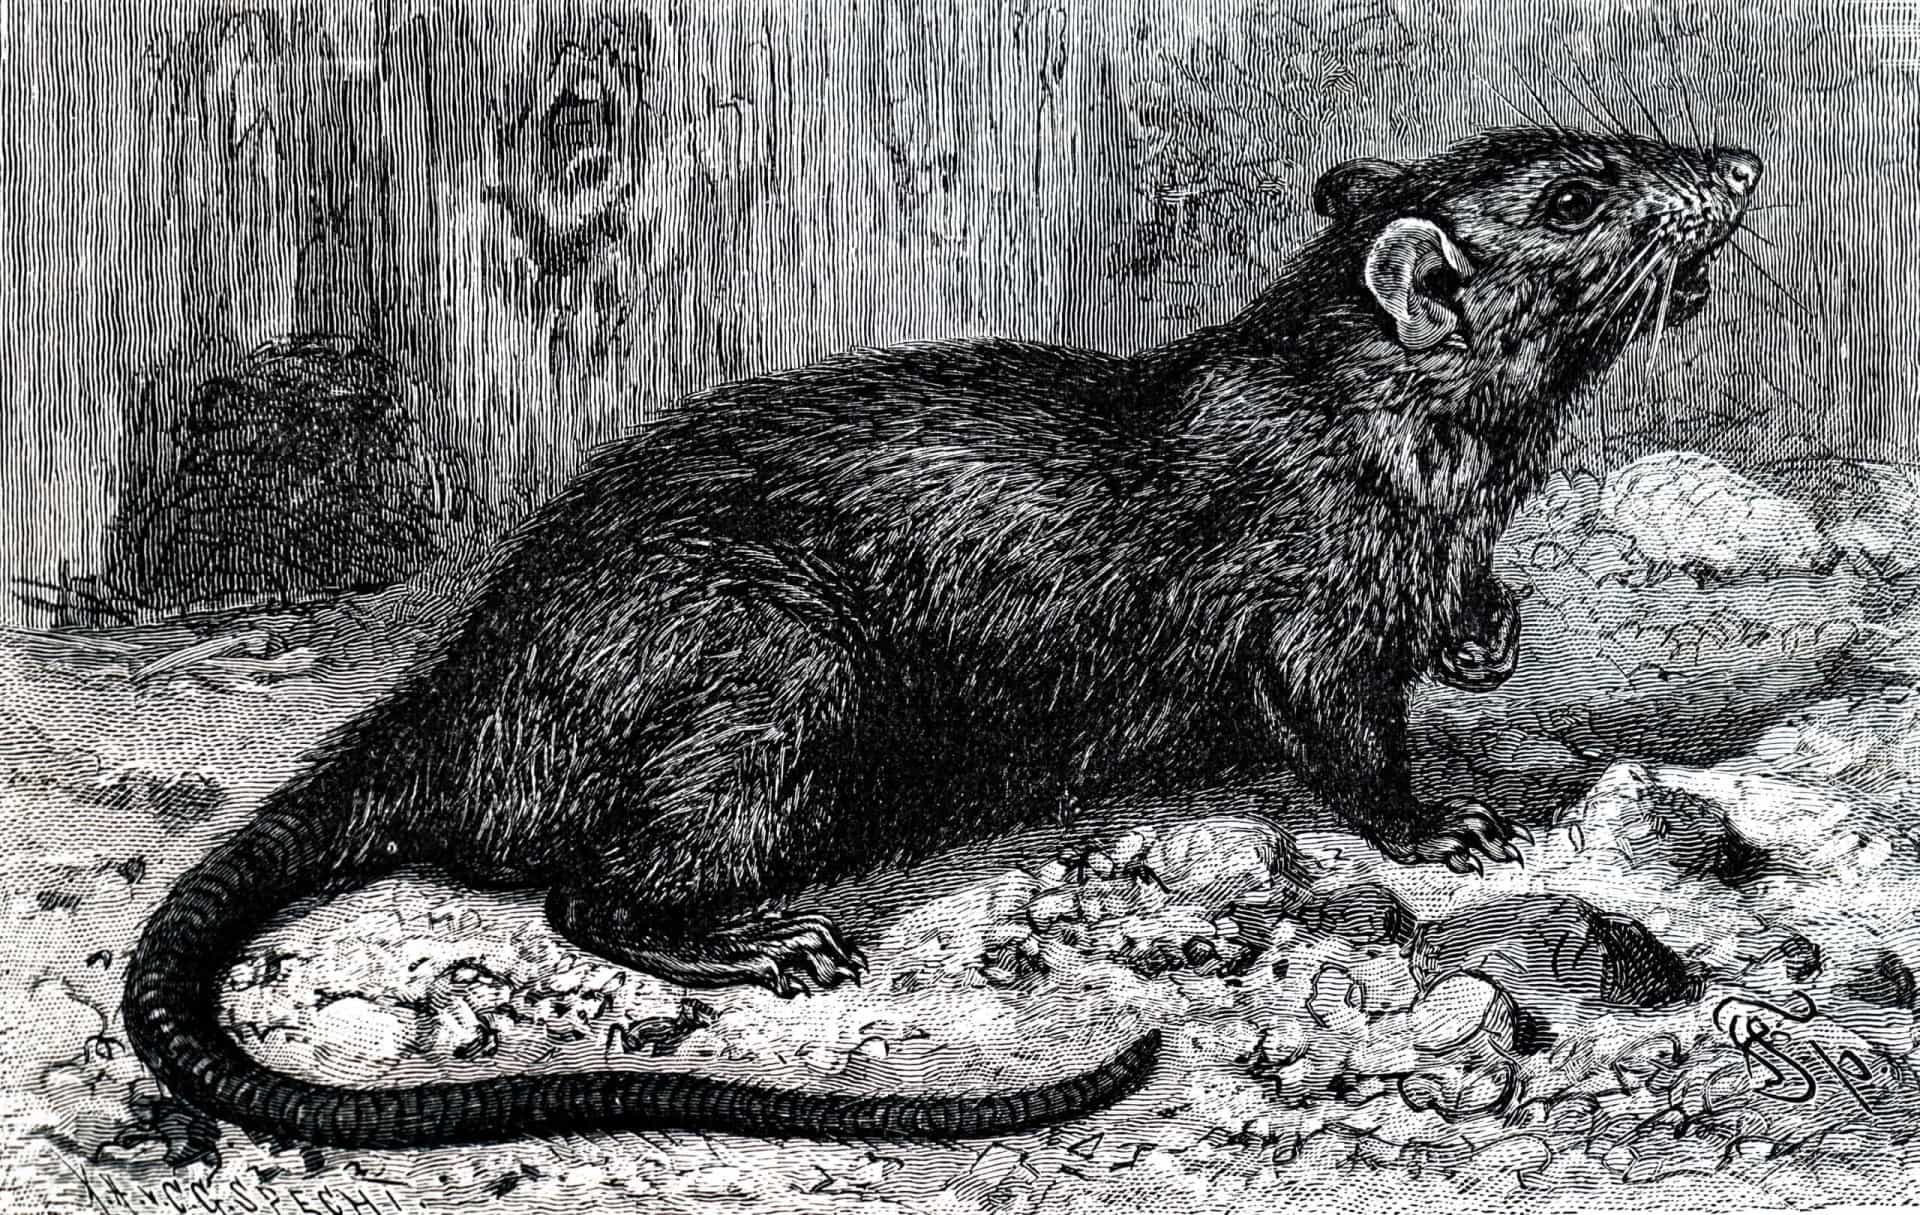 <p>According to the PNAS study, there is a contradiction to the commonly held belief that black rats and their fleas were the sole transmitters of the disease. Experts generally agree that the pandemic was most likely spread by the fleas living on black rats, with the rats serving as resevoir hosts. But where did the Black Death originate?</p>